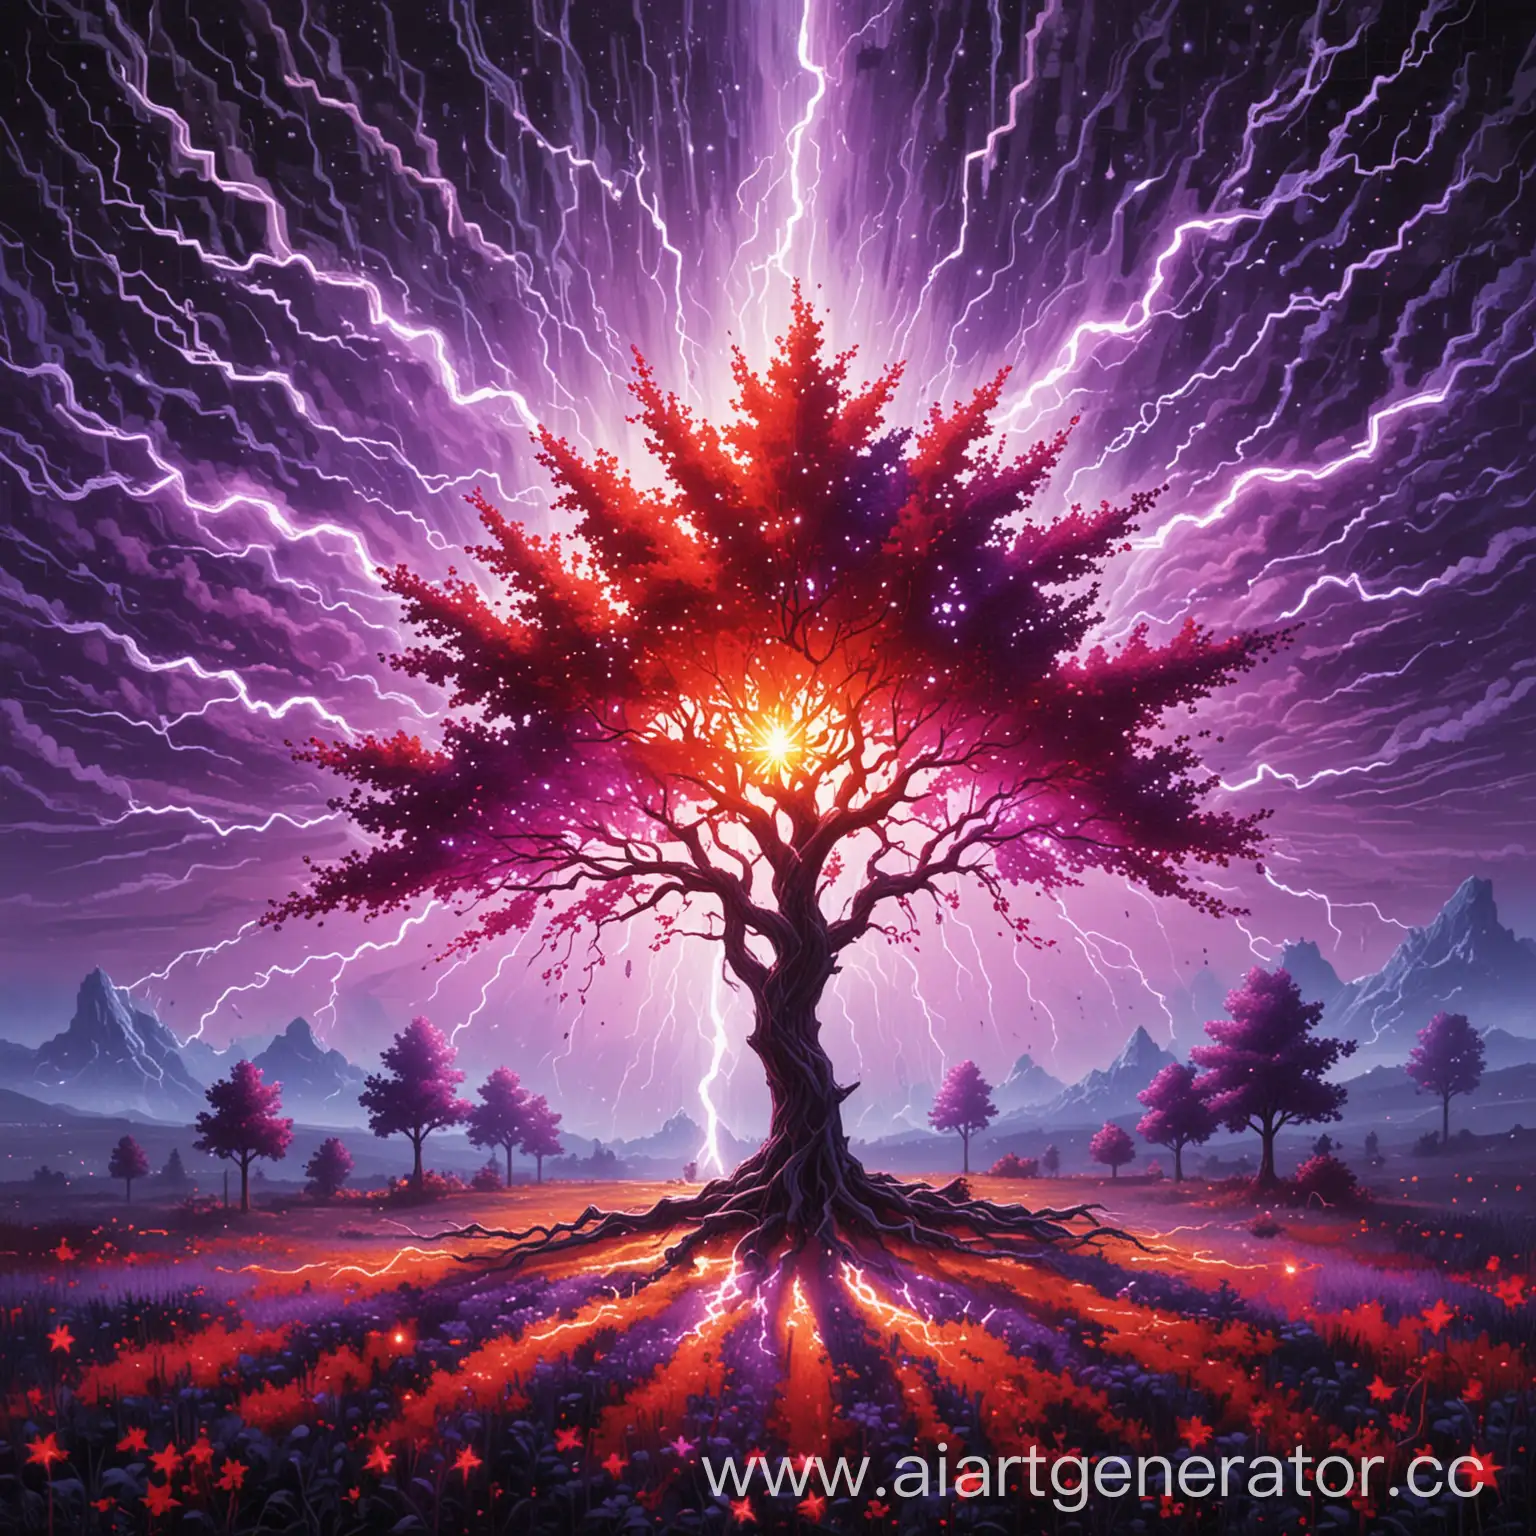 Pixelated-Art-Red-and-Purple-Starlands-with-Trees-and-Lightning